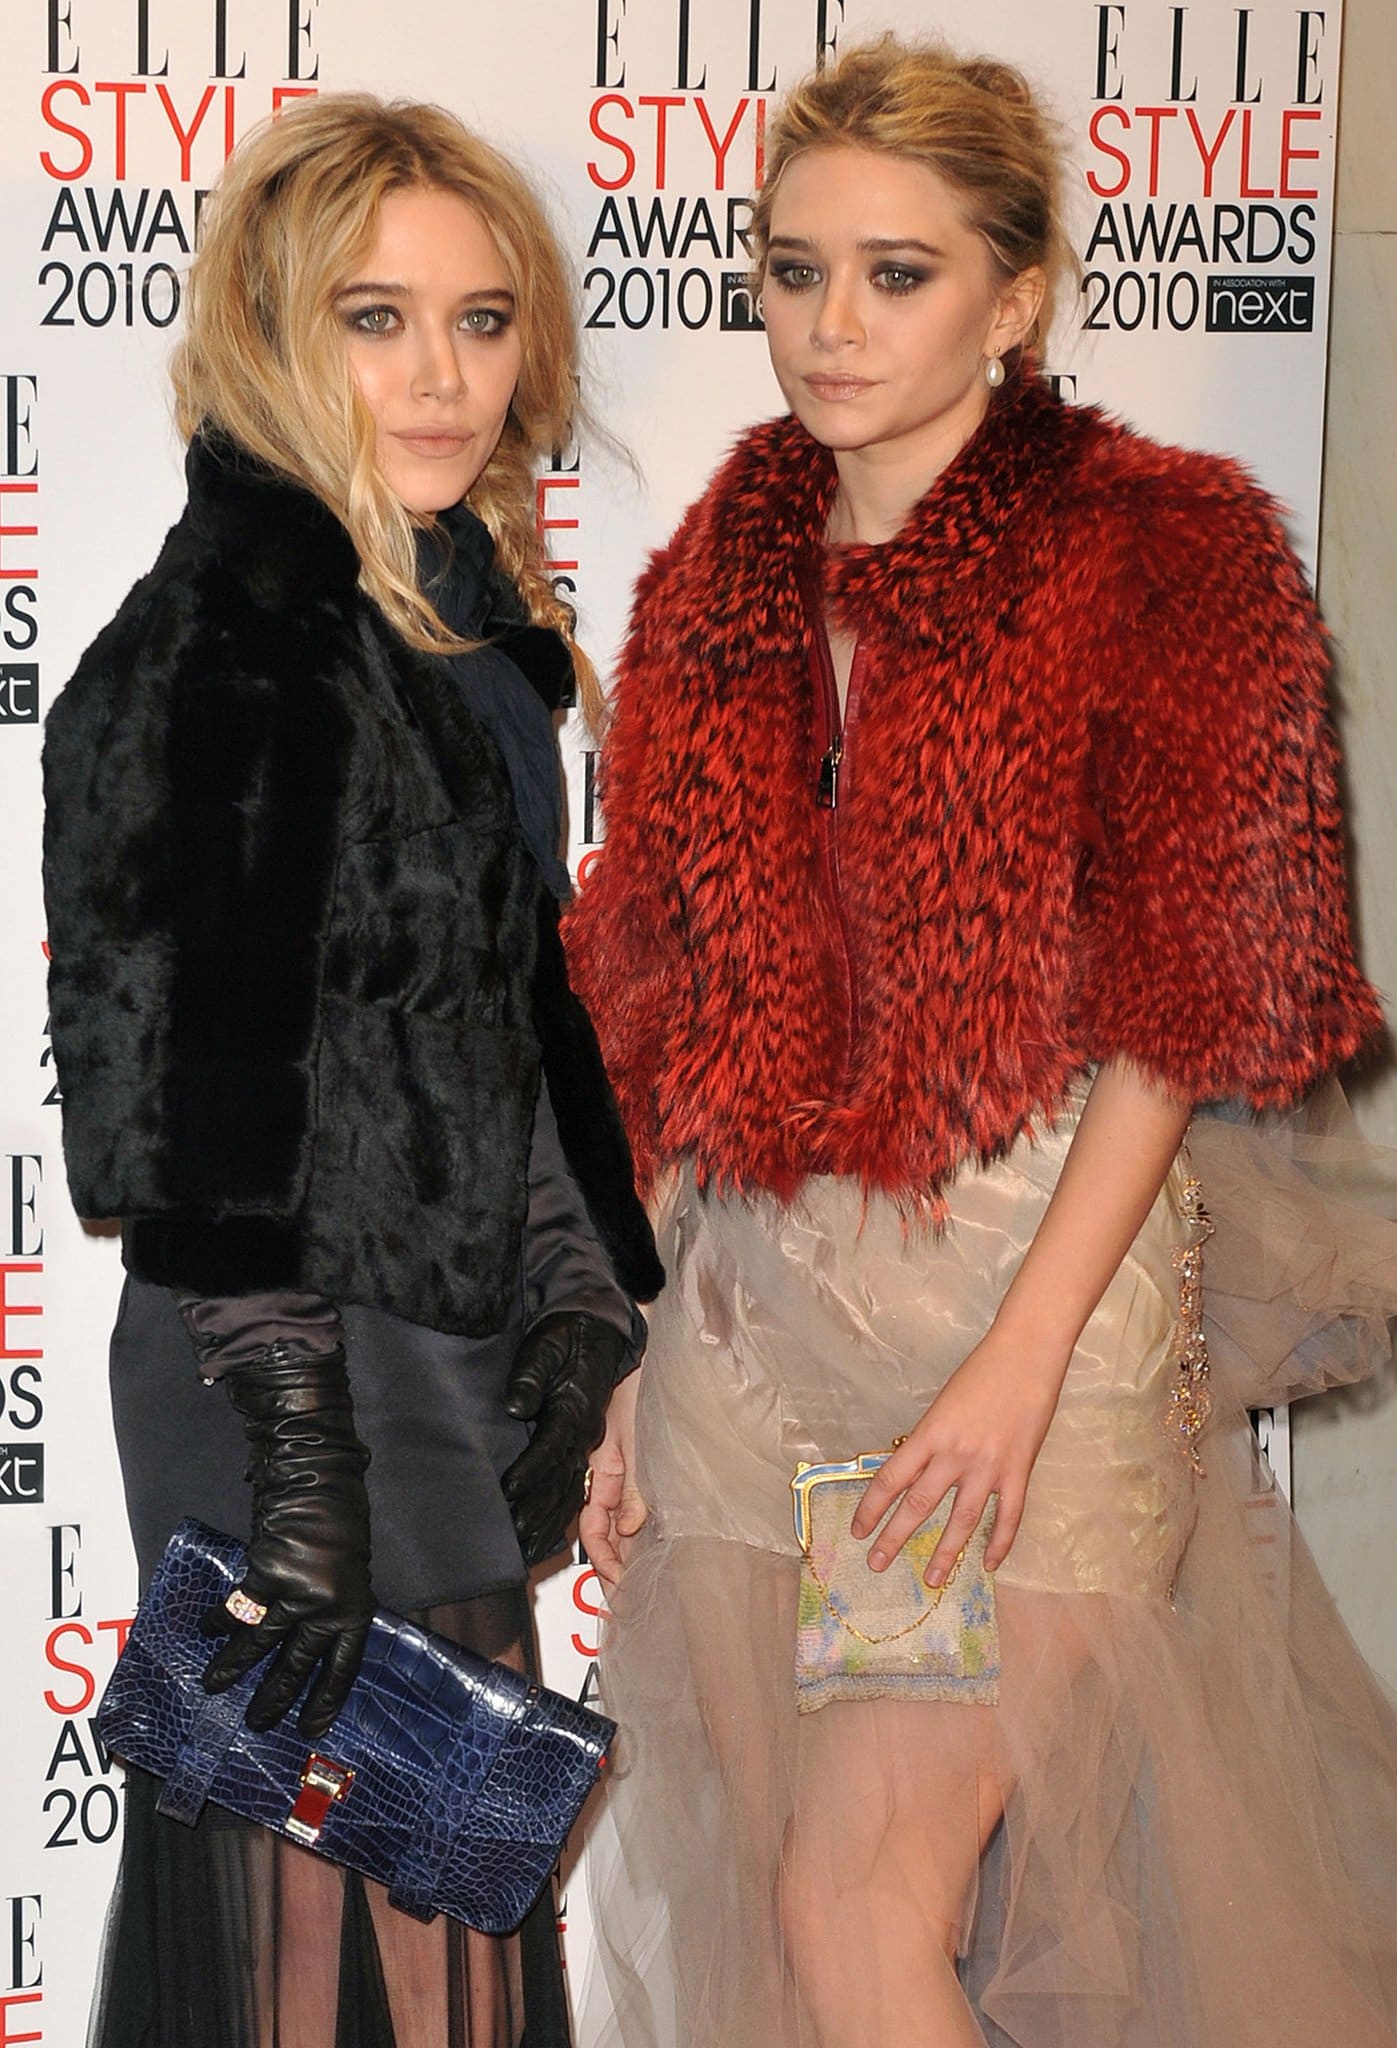 Mary-Kate and Ashley Olsen at The ELLE Style Awards 2010